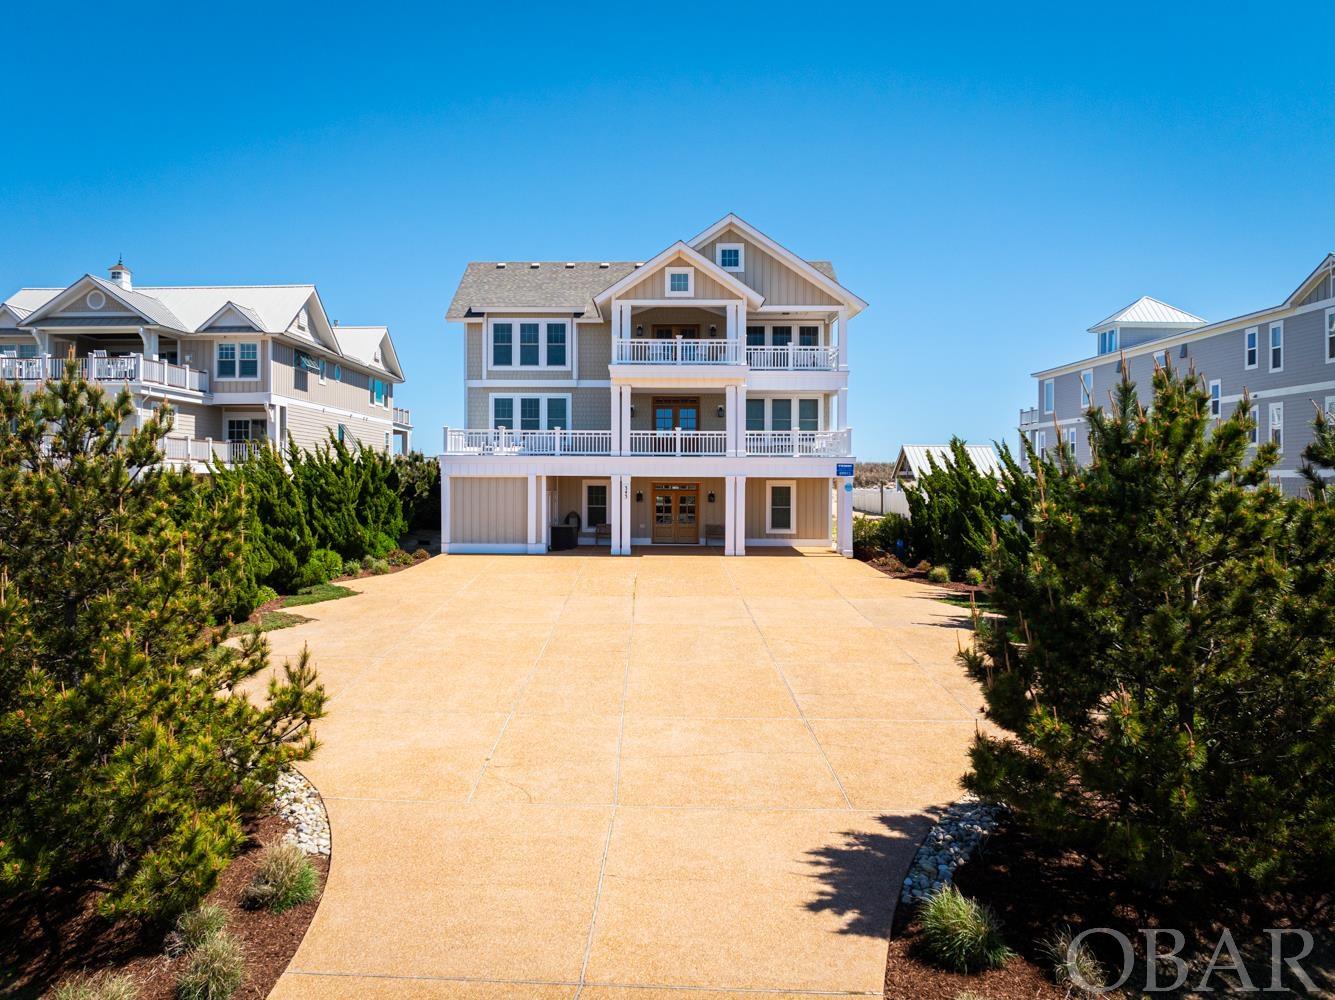 Welcome to 'Island Paradise.' Step inside, escape the ordinary and immerse yourself in a realm of opulence within this 11,800 square foot 12-bedroom oceanfront retreat nestled in the highly coveted Pine Island Reserve community of Corolla. Built by renown local Outer Banks Builder Olin Finch, Island Paradise is perfectly designed to host family vacations or corporate retreats, and exhibits an established and consistent rental history. Tranquility and rejuvenation await you within these walls, while expansive composite decks grace the exterior, overlooking the Atlantic Ocean sunrises to the east and the scenic sunsets of the Currituck Sound/Audubon Nature Preserve to the west. Marvel at breathtaking panoramic ocean views on the third level, where an expansive open layout offers sweeping vistas from the ocean living area, dining space, and large screened-in porch. On this level you will also find three master bedrooms, a sunset lounge room with custom Boat Bar overlooking to Audubon Nature Preserve, a half-bathroom, and a convenient elevator access servicing all levels. The second level boasts six additional master bedrooms, with an Oceanfront Lounge offering a serene retreat to unwind or enjoy private moments with loved ones, all within arm's reach of the coffee bar for refreshments. On the first floor, you'll find three more master bedrooms along with world-class entertainment havens and a pool bar room. A Theater Room equipped with NEW luxurious leather power reclining seats awaits the movie lovers, while the Arcade Room offers new & old era classics like Pacman, Big Buck Hunter, etc. A rec room featuring a pool table, shuffleboard table and a spacious Sports-Bar-style bar area leads out to a remarkable outdoor sanctuary complete with a covered outdoor kitchen, NEW poolside Tiki Hut, a half-bathroom, dining area, and large screened in lounge. While the mesmerizing ocean beckons just steps away via a private walkway, the custom pool stands as a serene retreat in its own right. Soak up some sunshine in the shallow lounging zone, warm up in the infinity-edge spa, or swim up to the poolside bar and enjoy a refreshing beverage. Showcasing itself as a proven rental investment, this home accepts rental bookings more than 51 weeks in advance. Full list of updates available upon request.